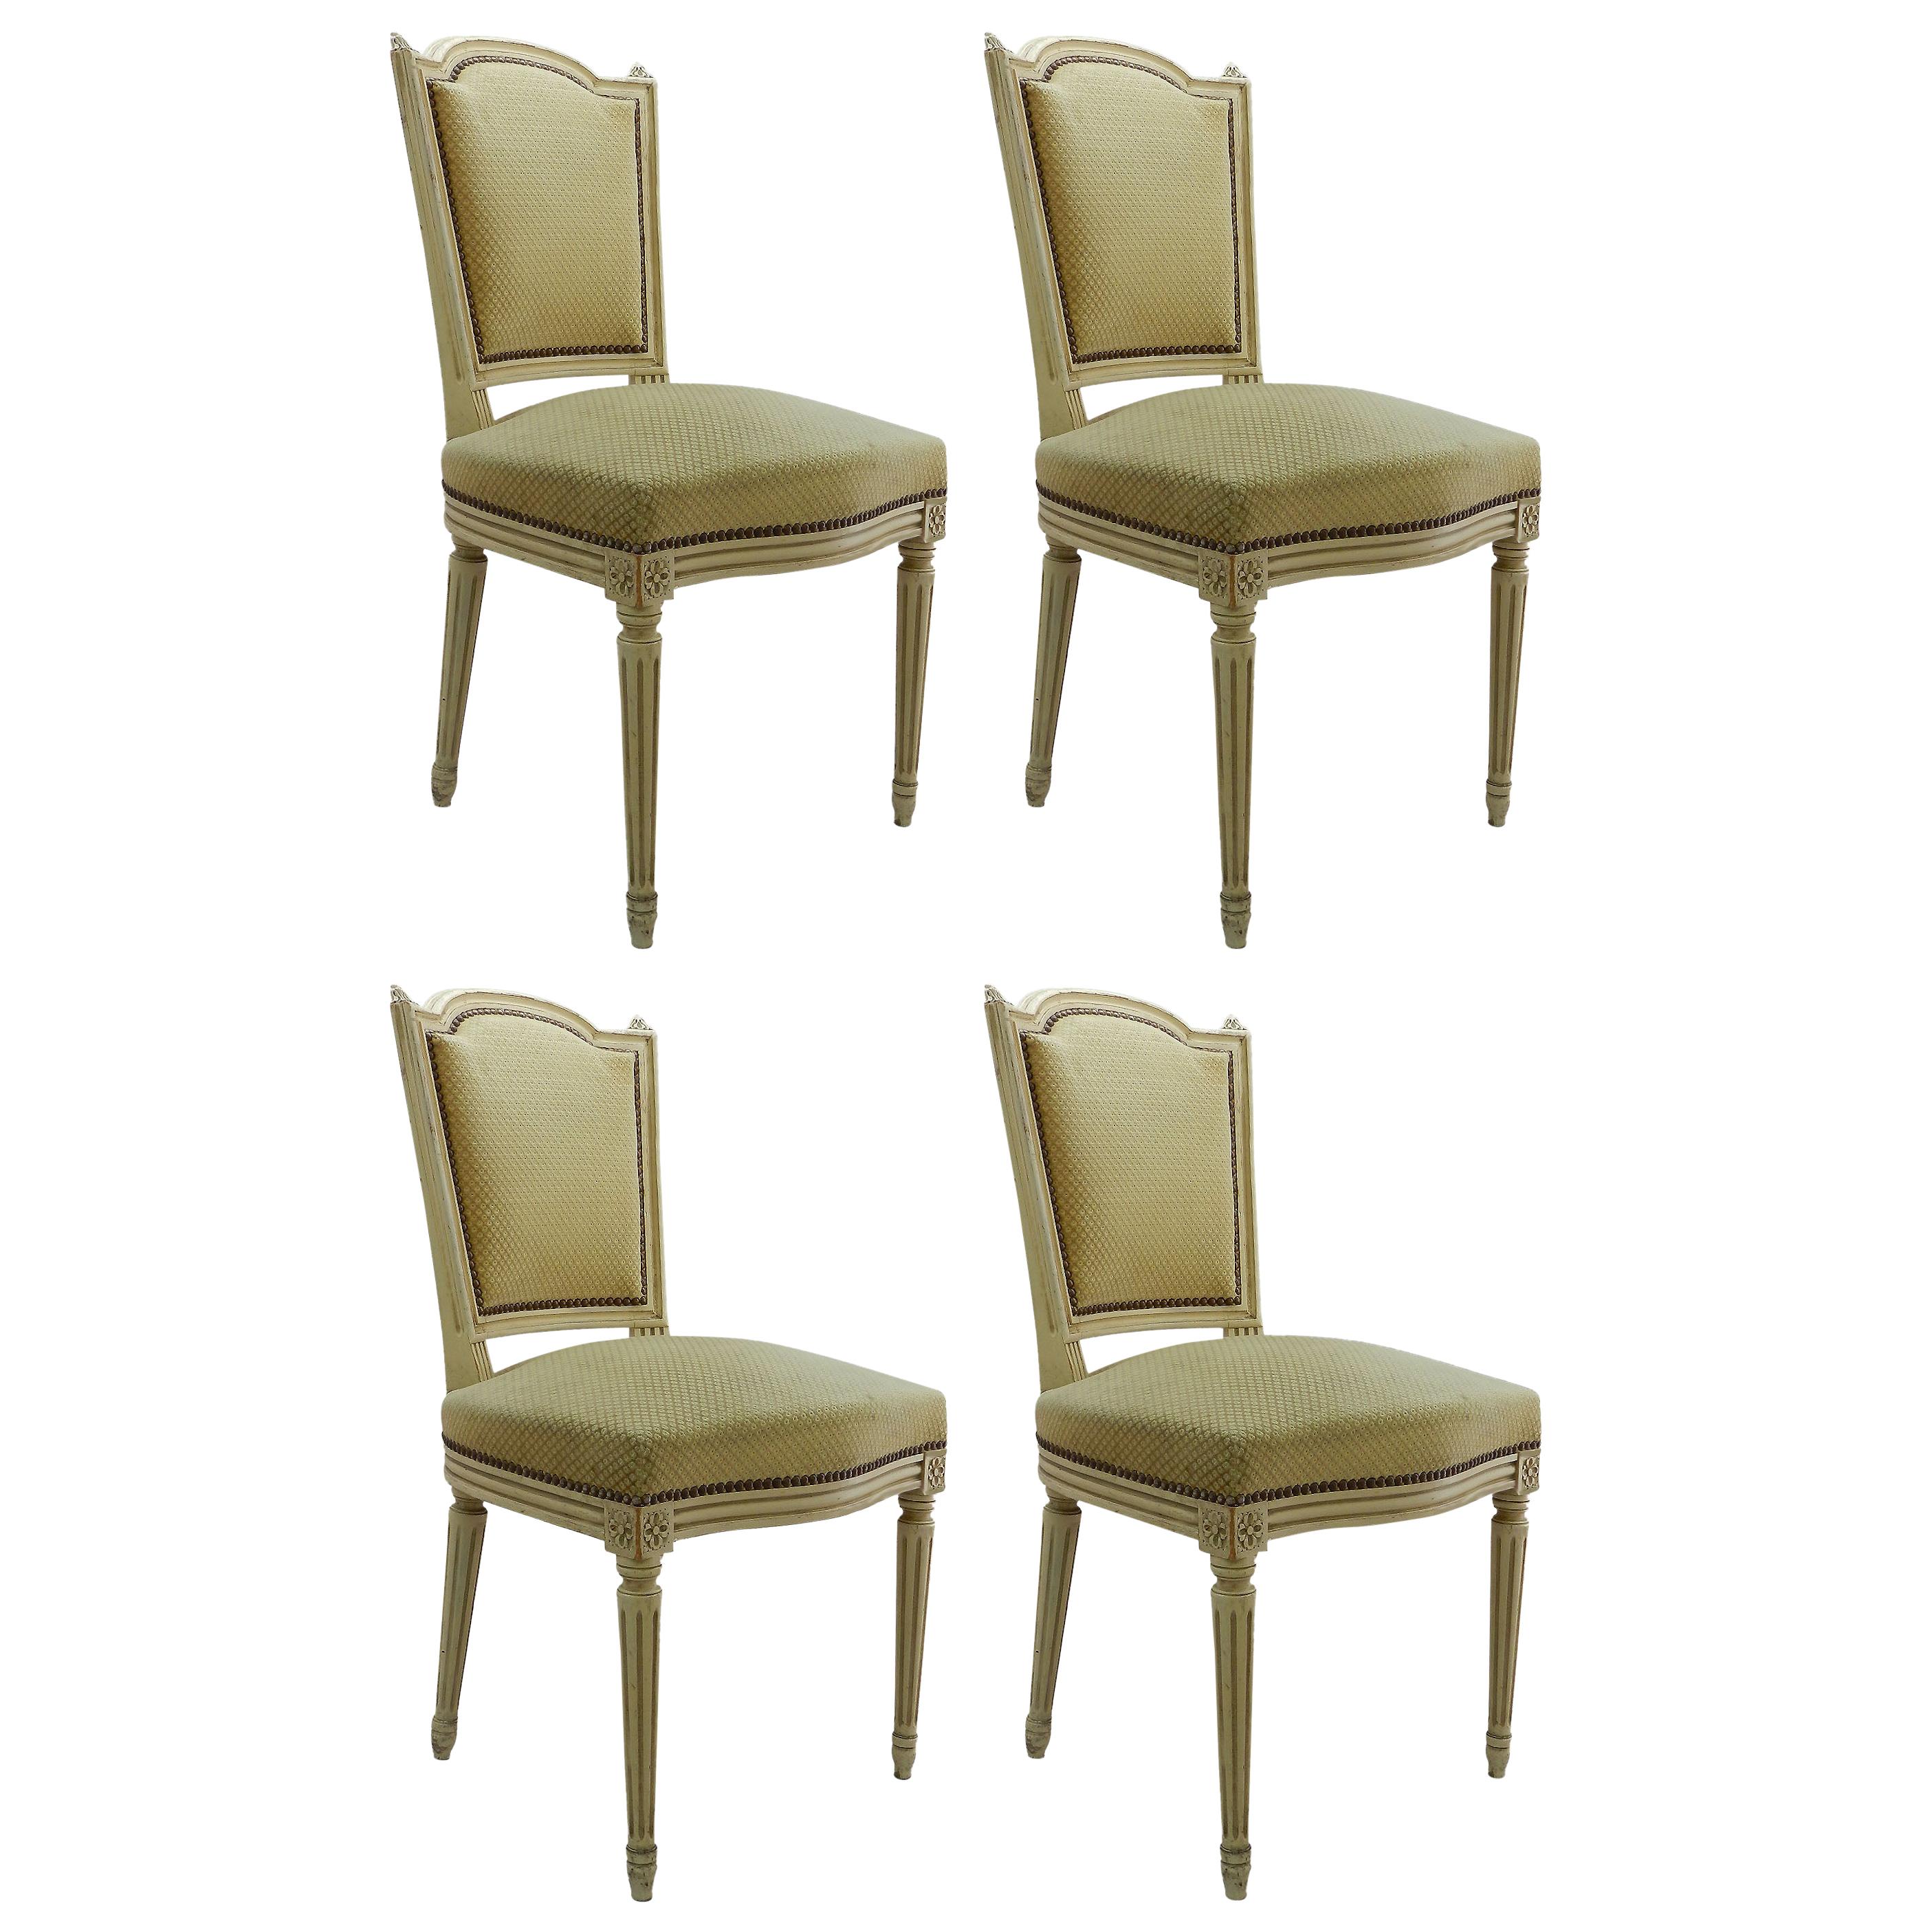 Four French Dining Chairs c1920 Louis XVI Revival Original Paint Upholstered